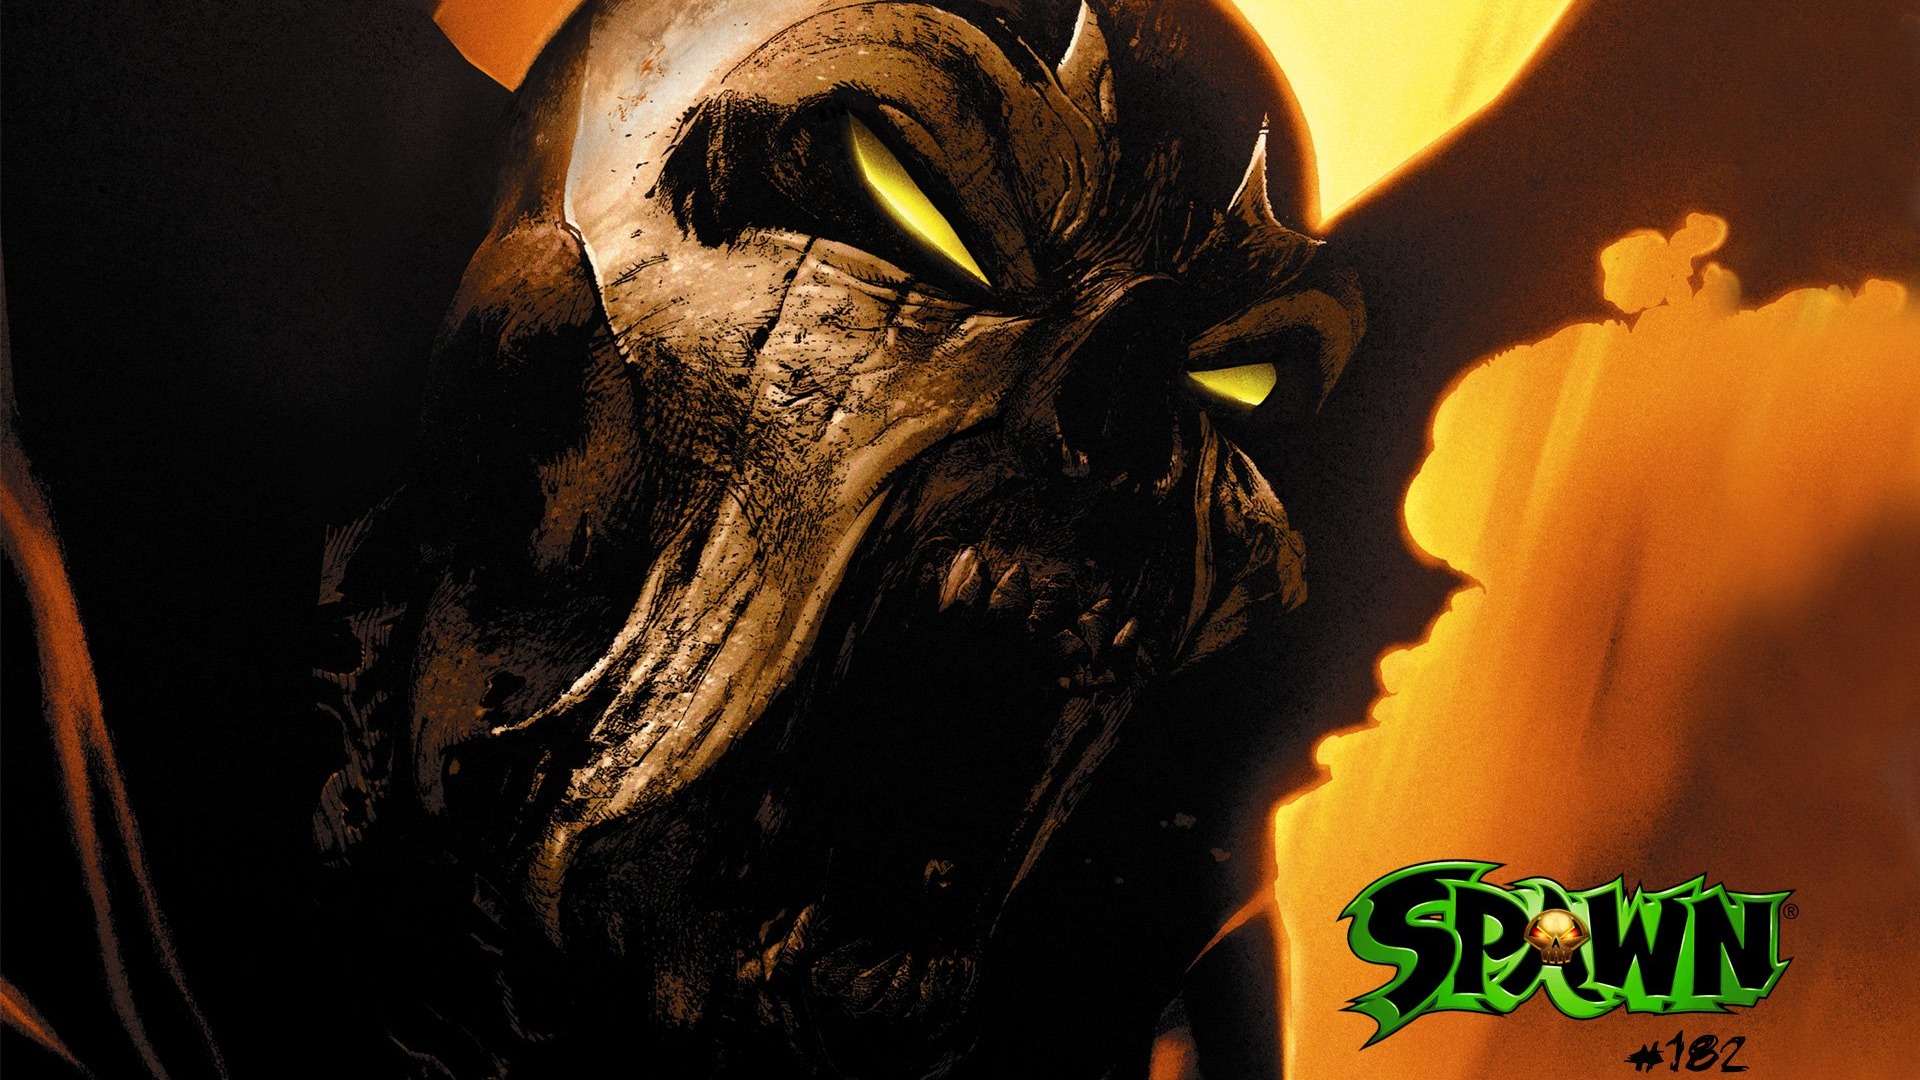 Spawn HD Wallpapers #6 - 1920x1080